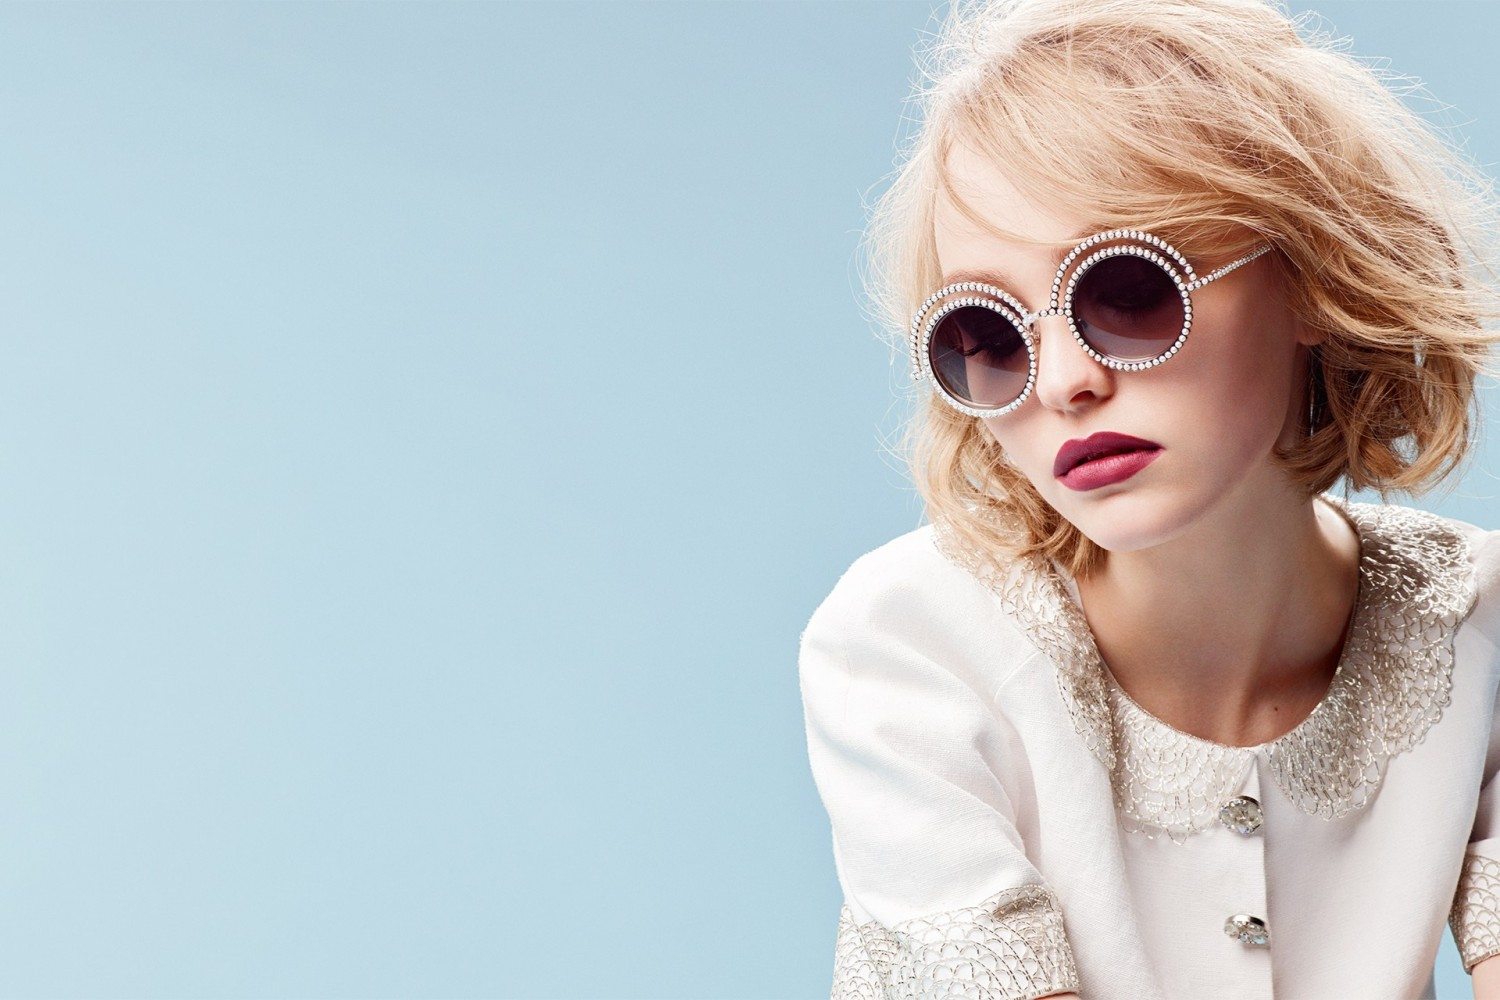 Lily-Rose Depp as the face of Chanel in new Eyewear Campaign